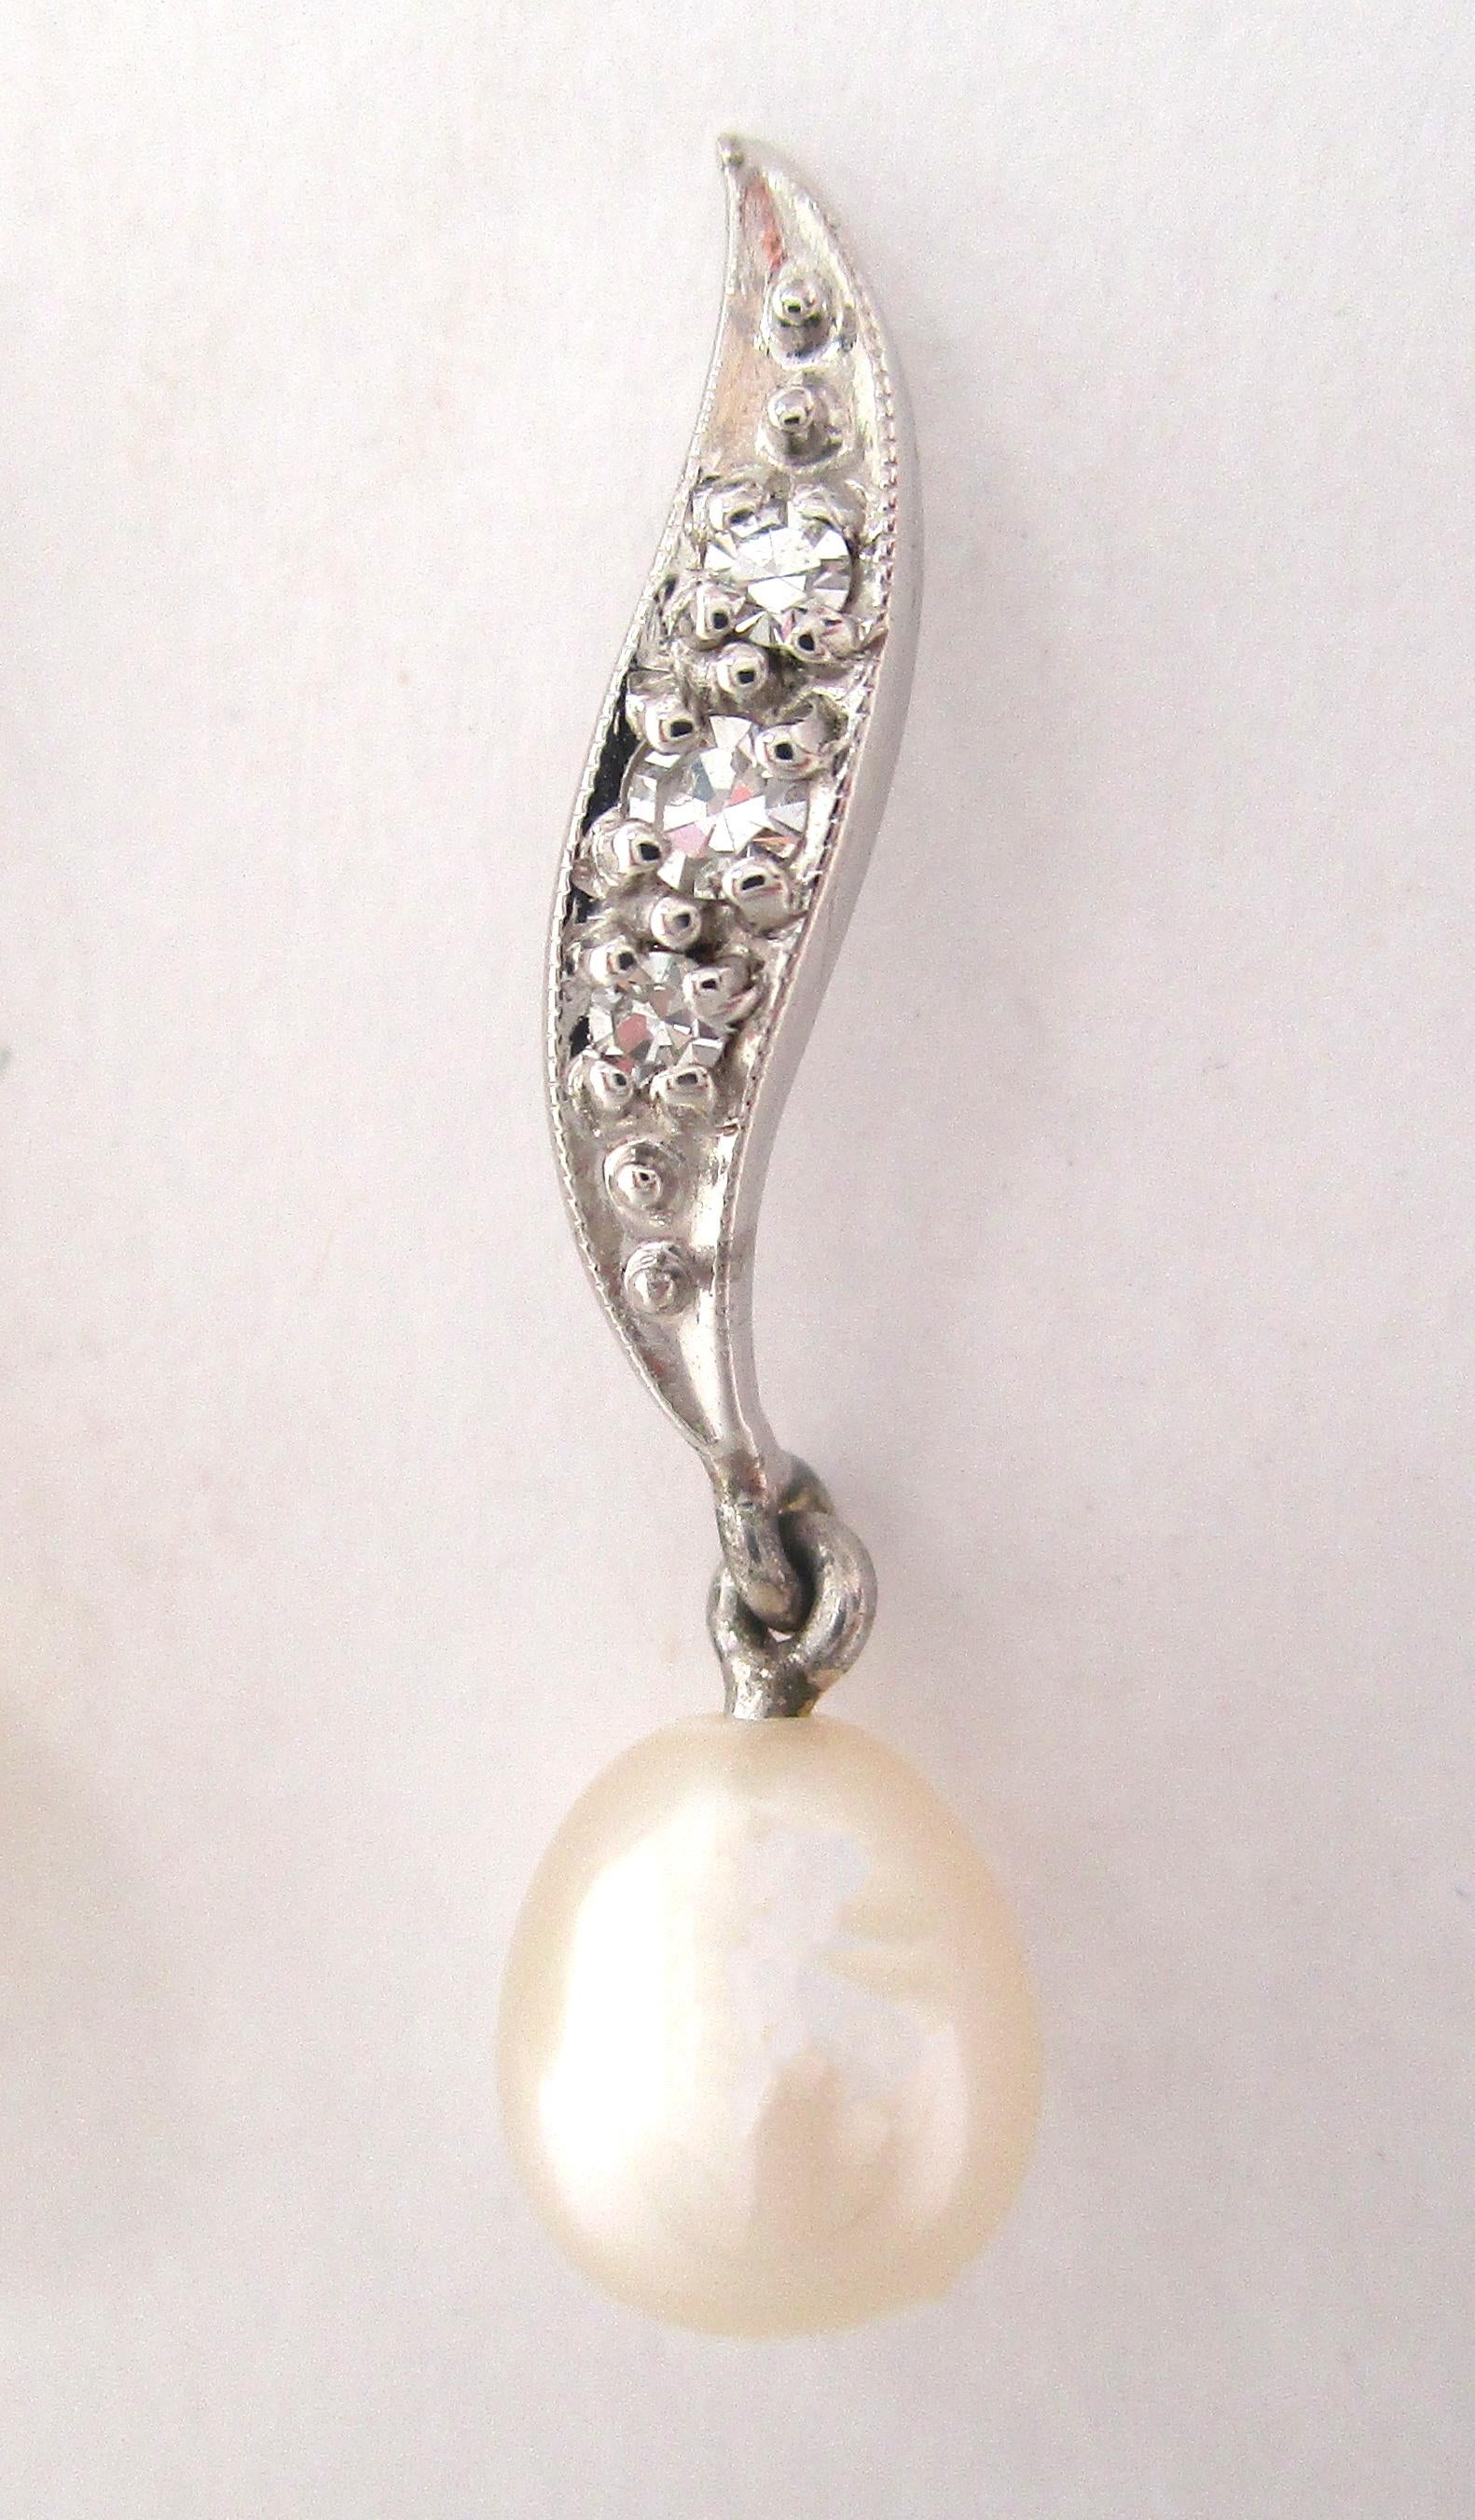 Modernist Midcentury 14 Karat White Gold Diamond and Pearl Articulated Drop Earrings For Sale